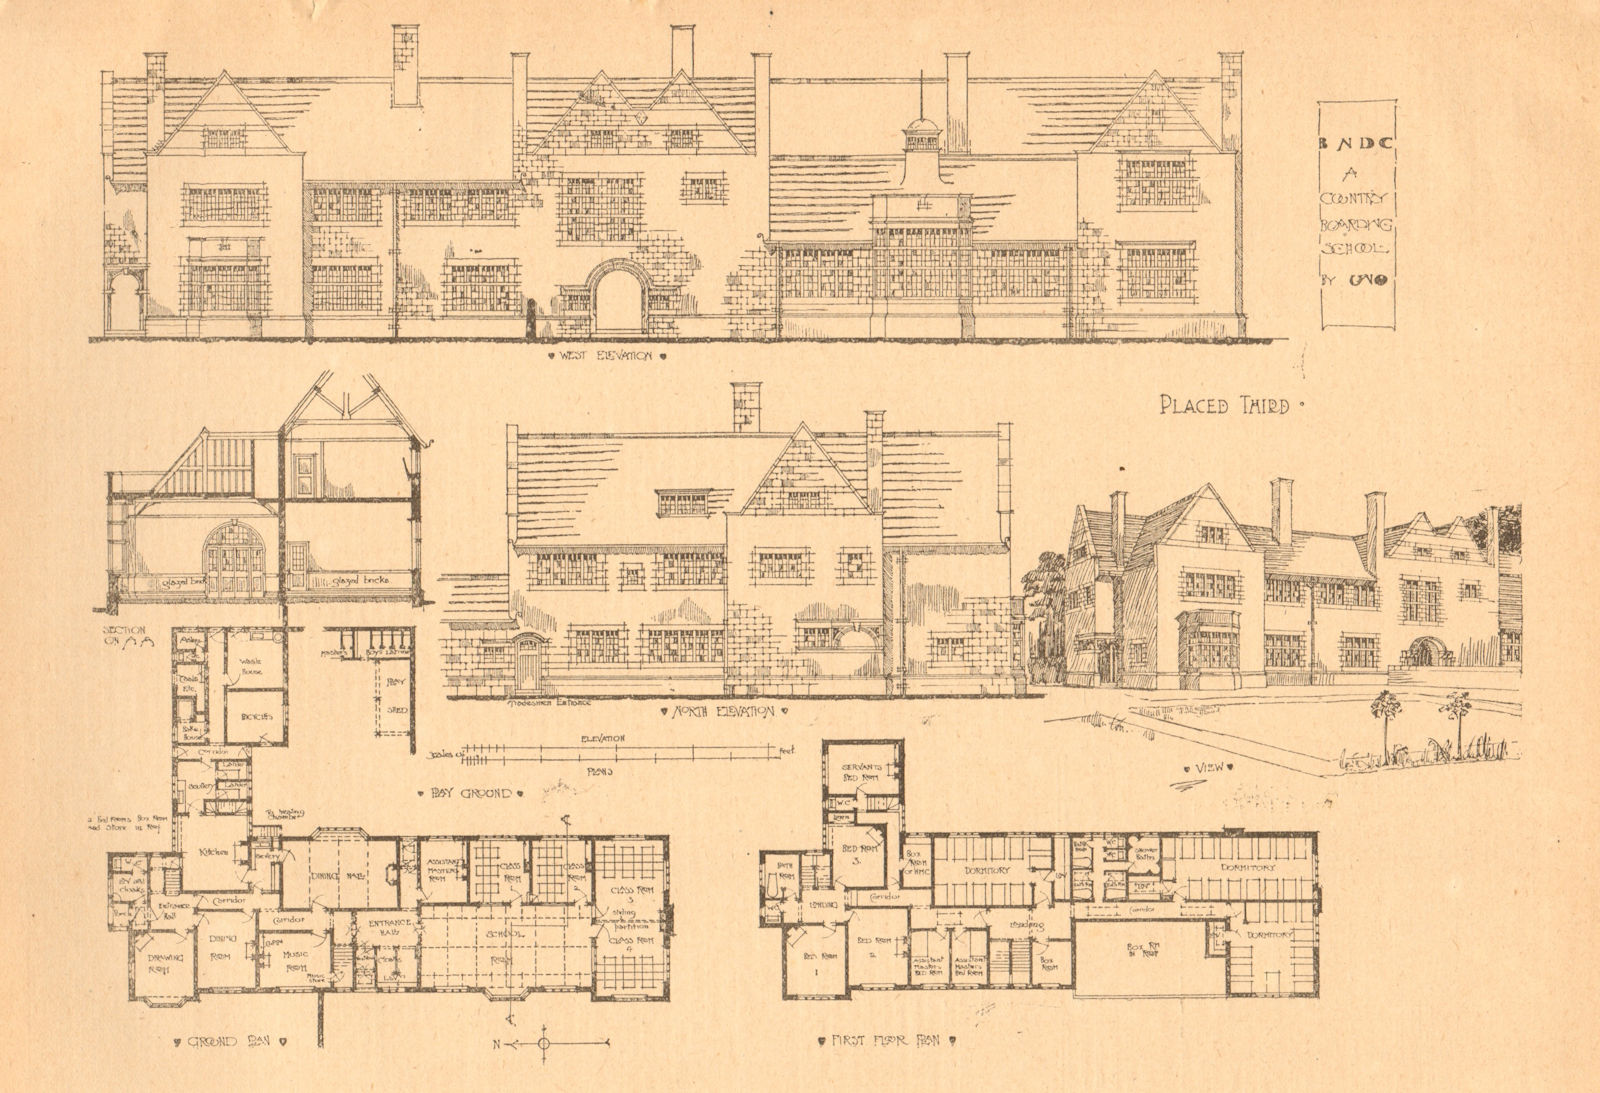 A Country Boarding School by Uno. Elevations, Ground & 1st floor plan 1901